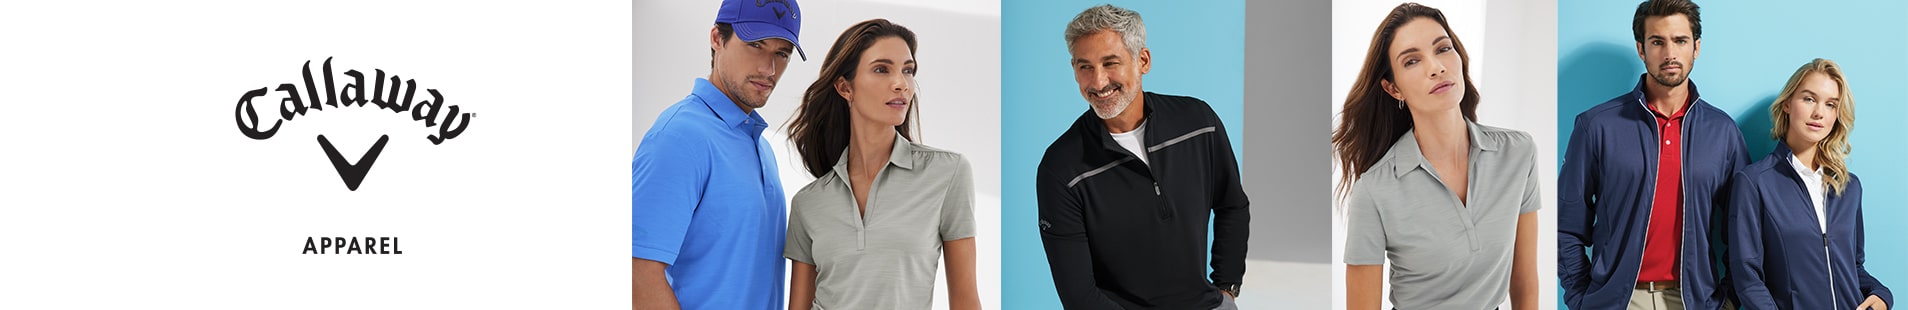 callaway wholesale polo shirts and golf apparel for men and women